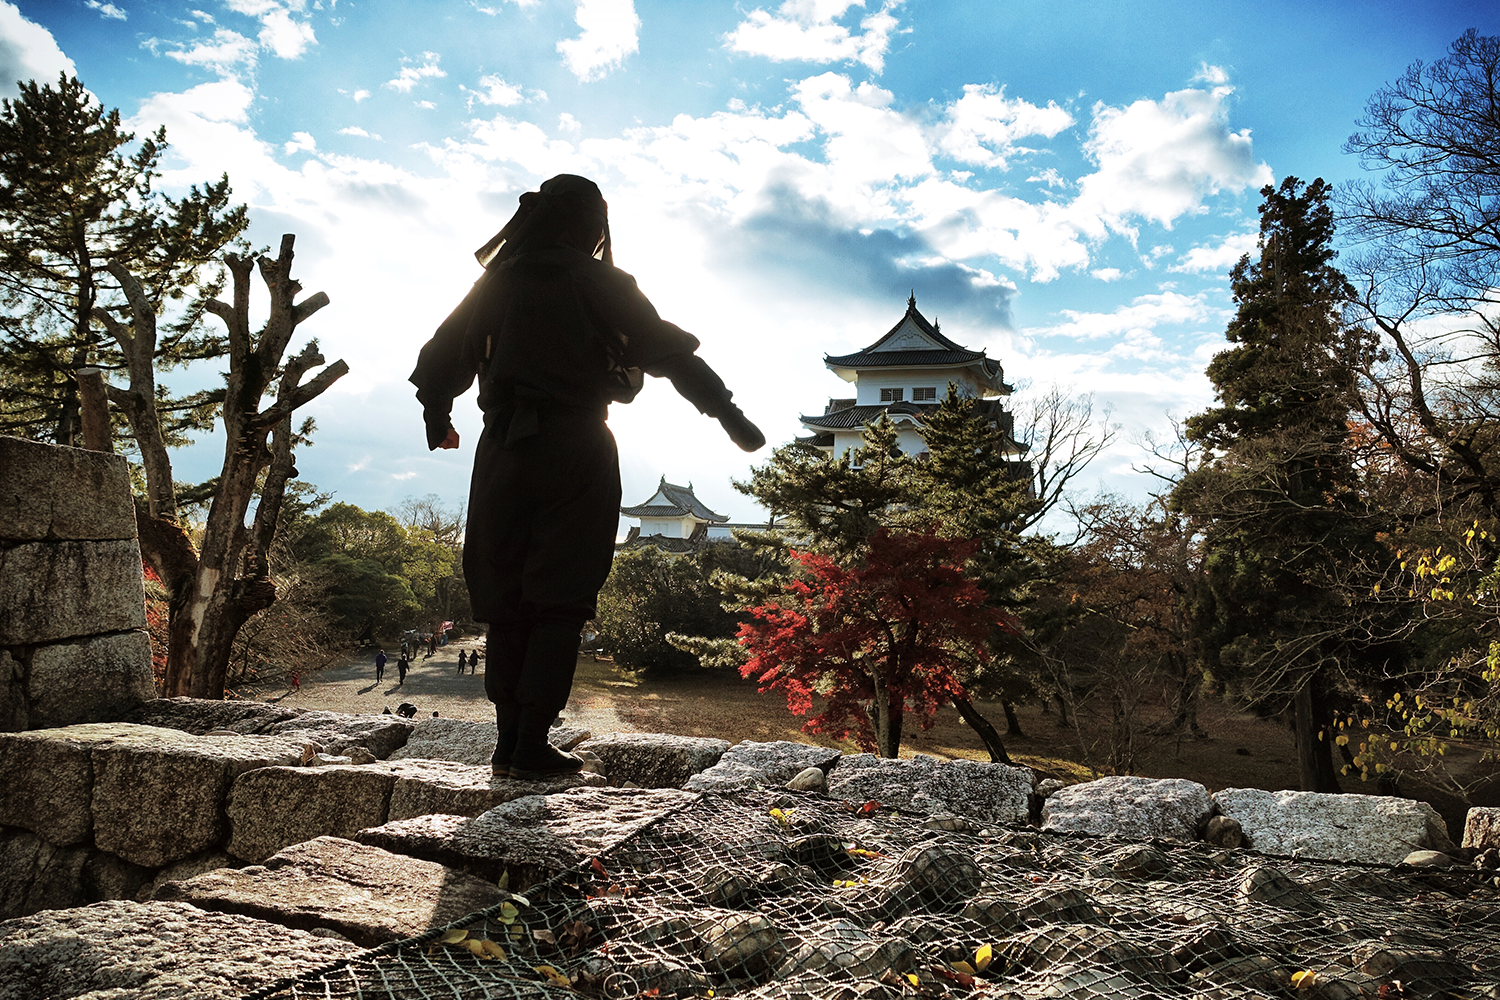 A lone ninja stands upon a stone wall facing an old castle.